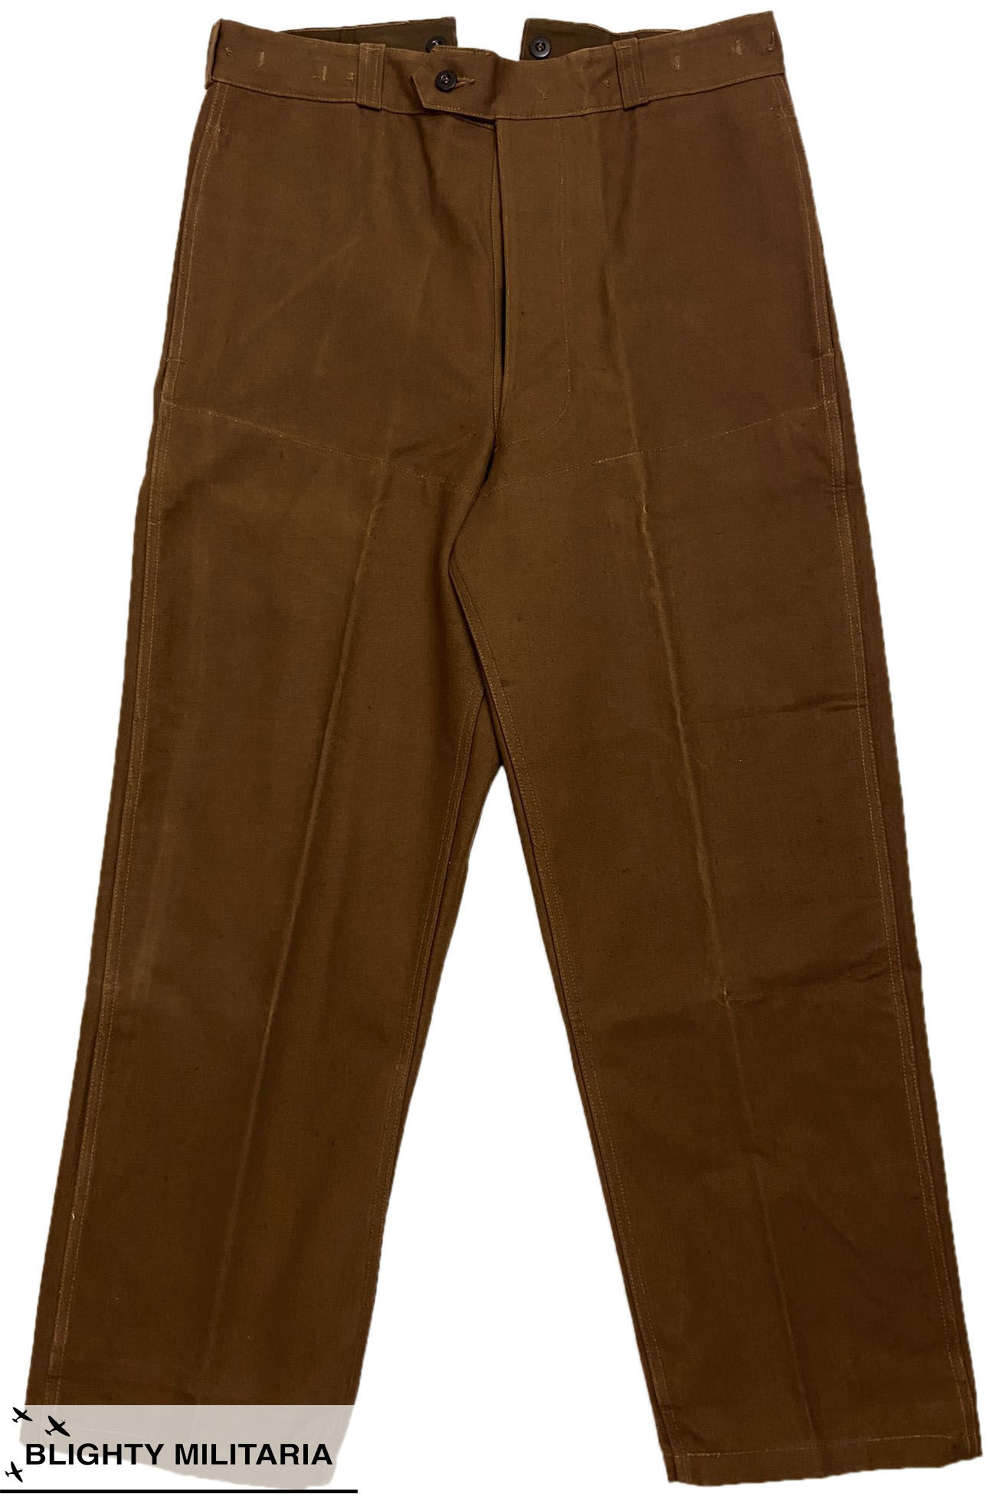 Original 1940s French SNCF Railway Worker's Duck Cotton Work Trousers